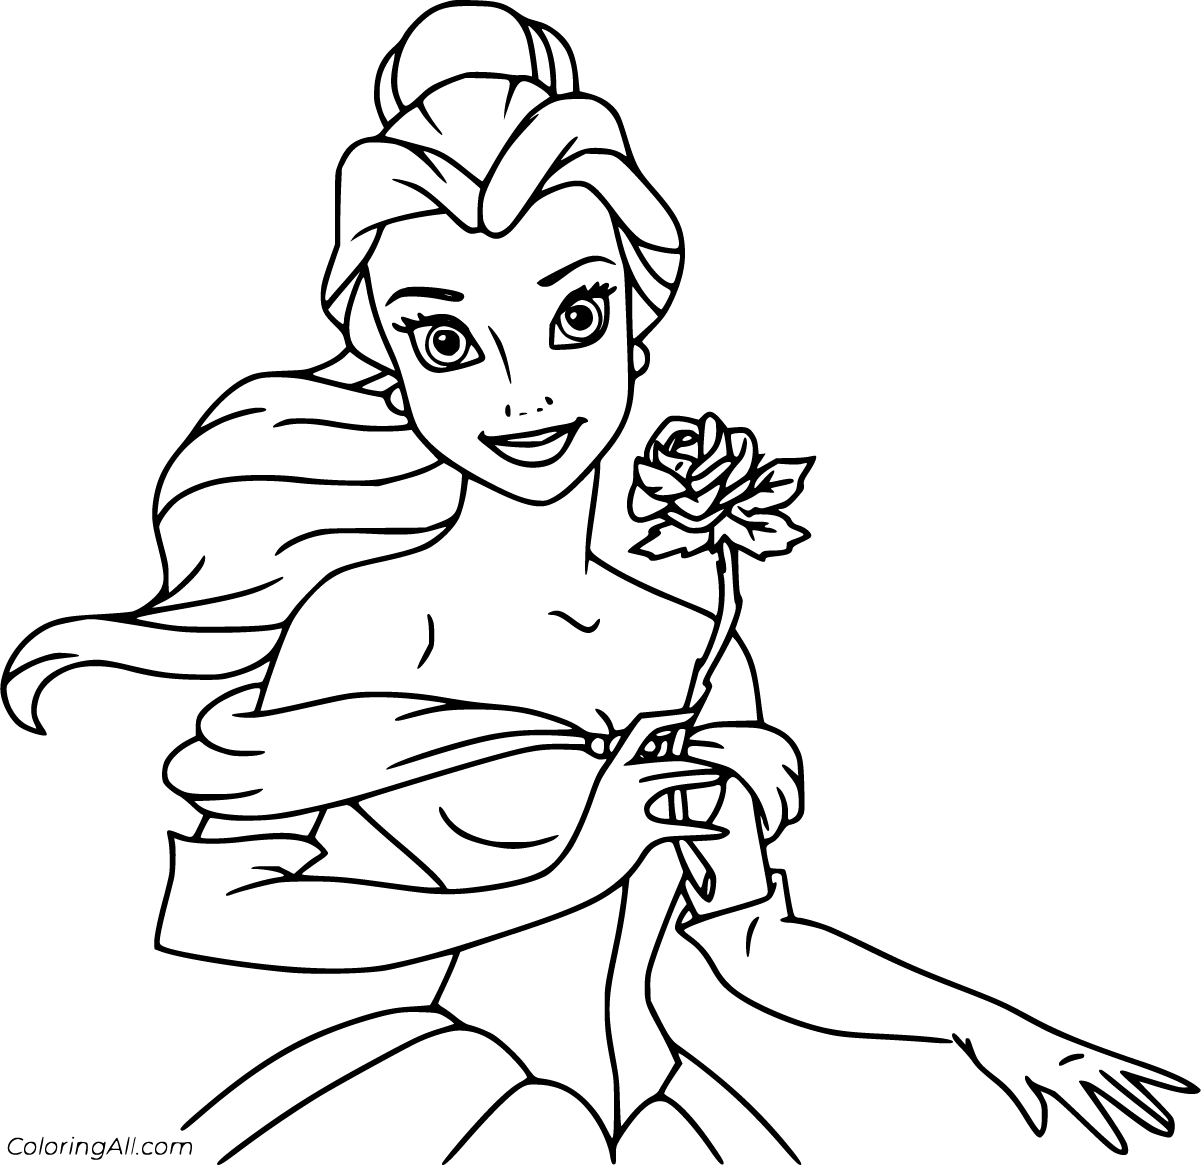 Beauty and the Beast Coloring Pages   ColoringAll